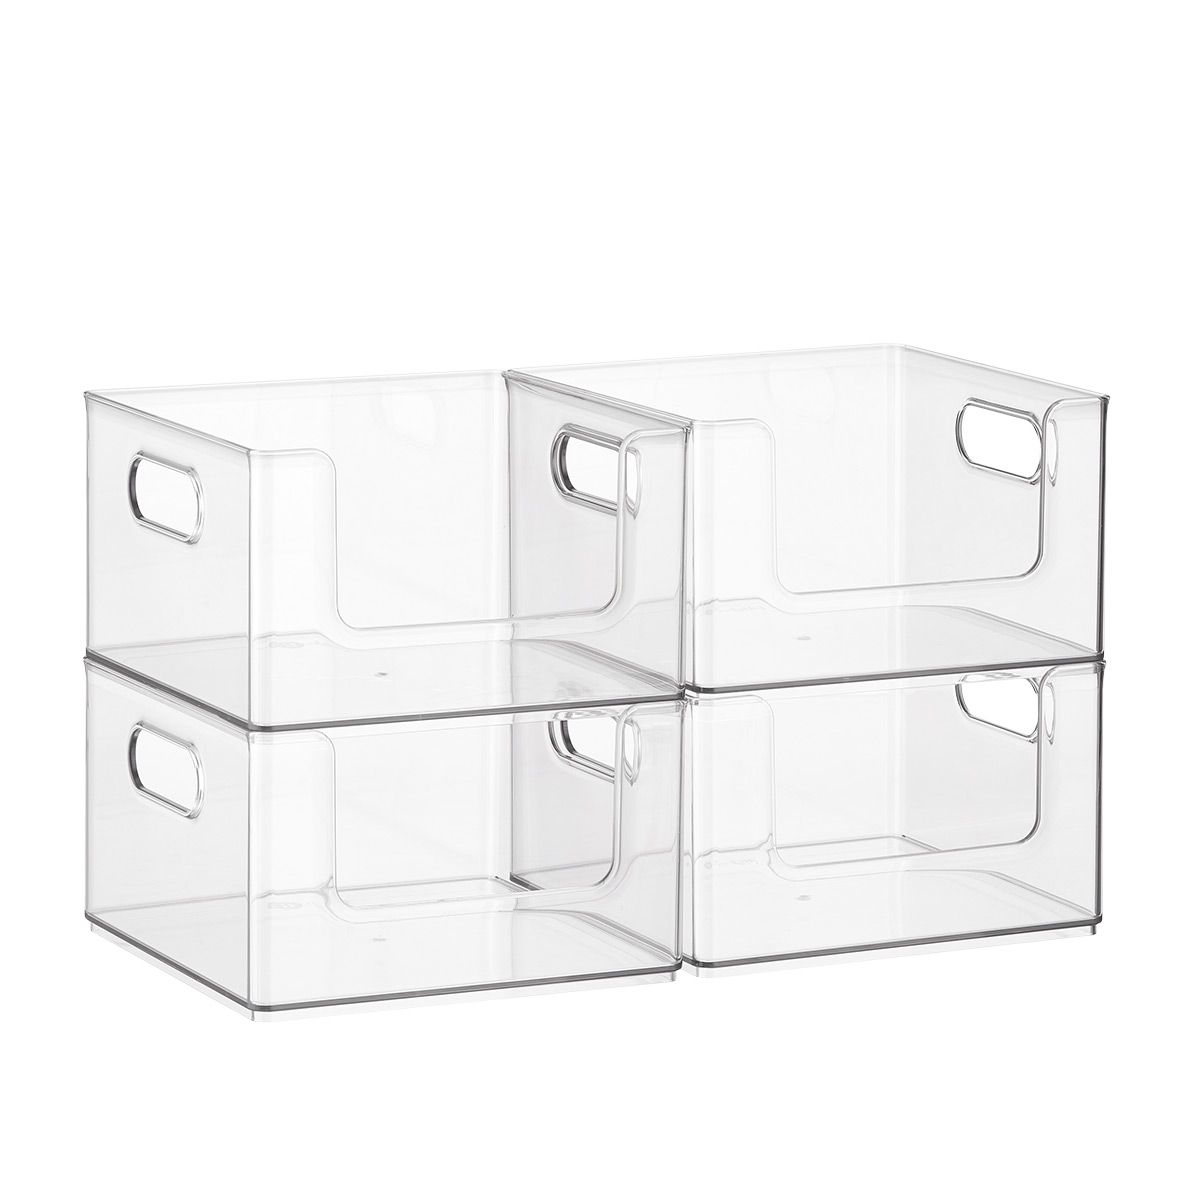 T.H.E. Stacking Pantry Bin | The Container Store